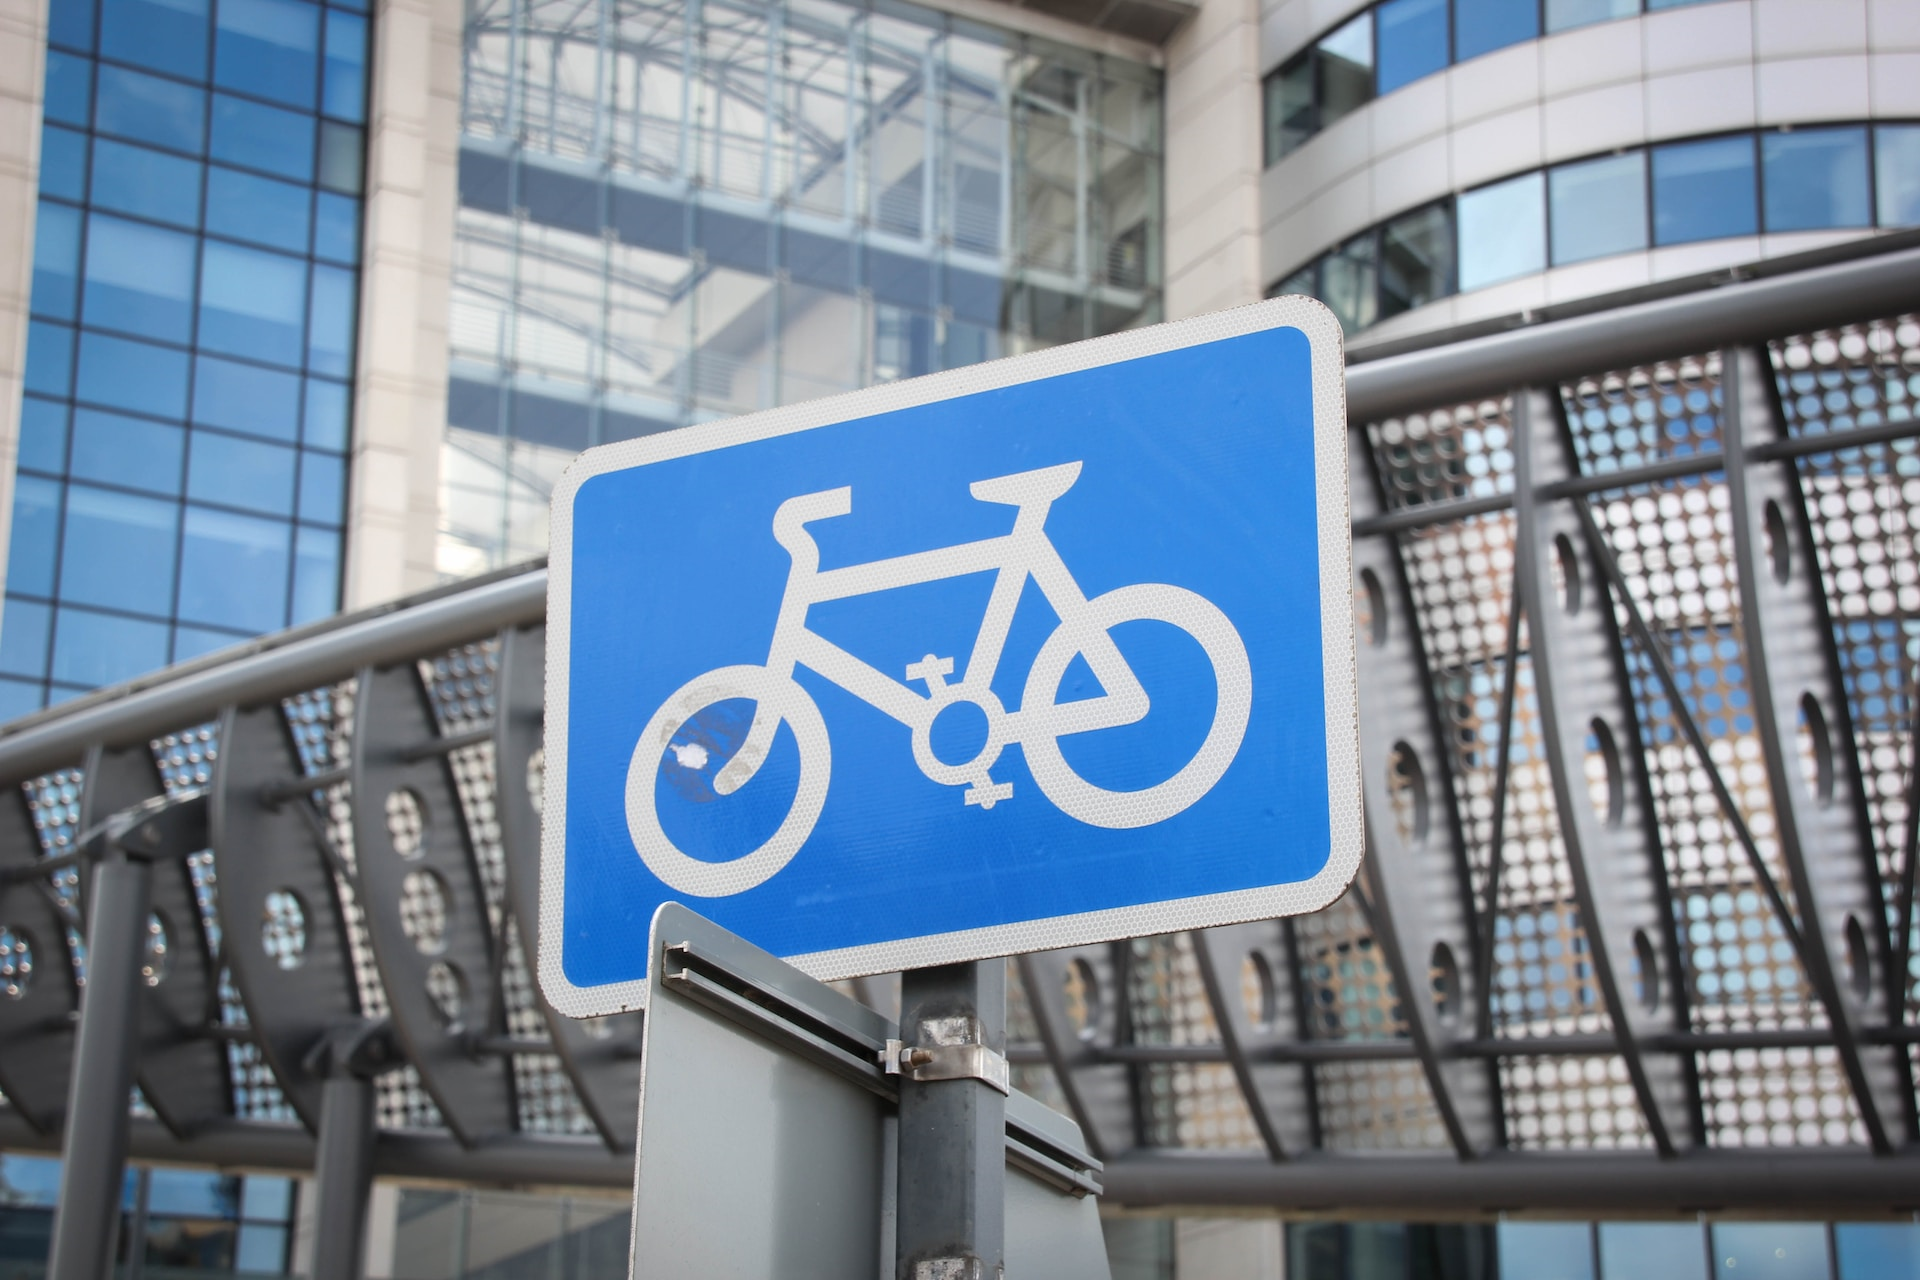 Cycling road sign